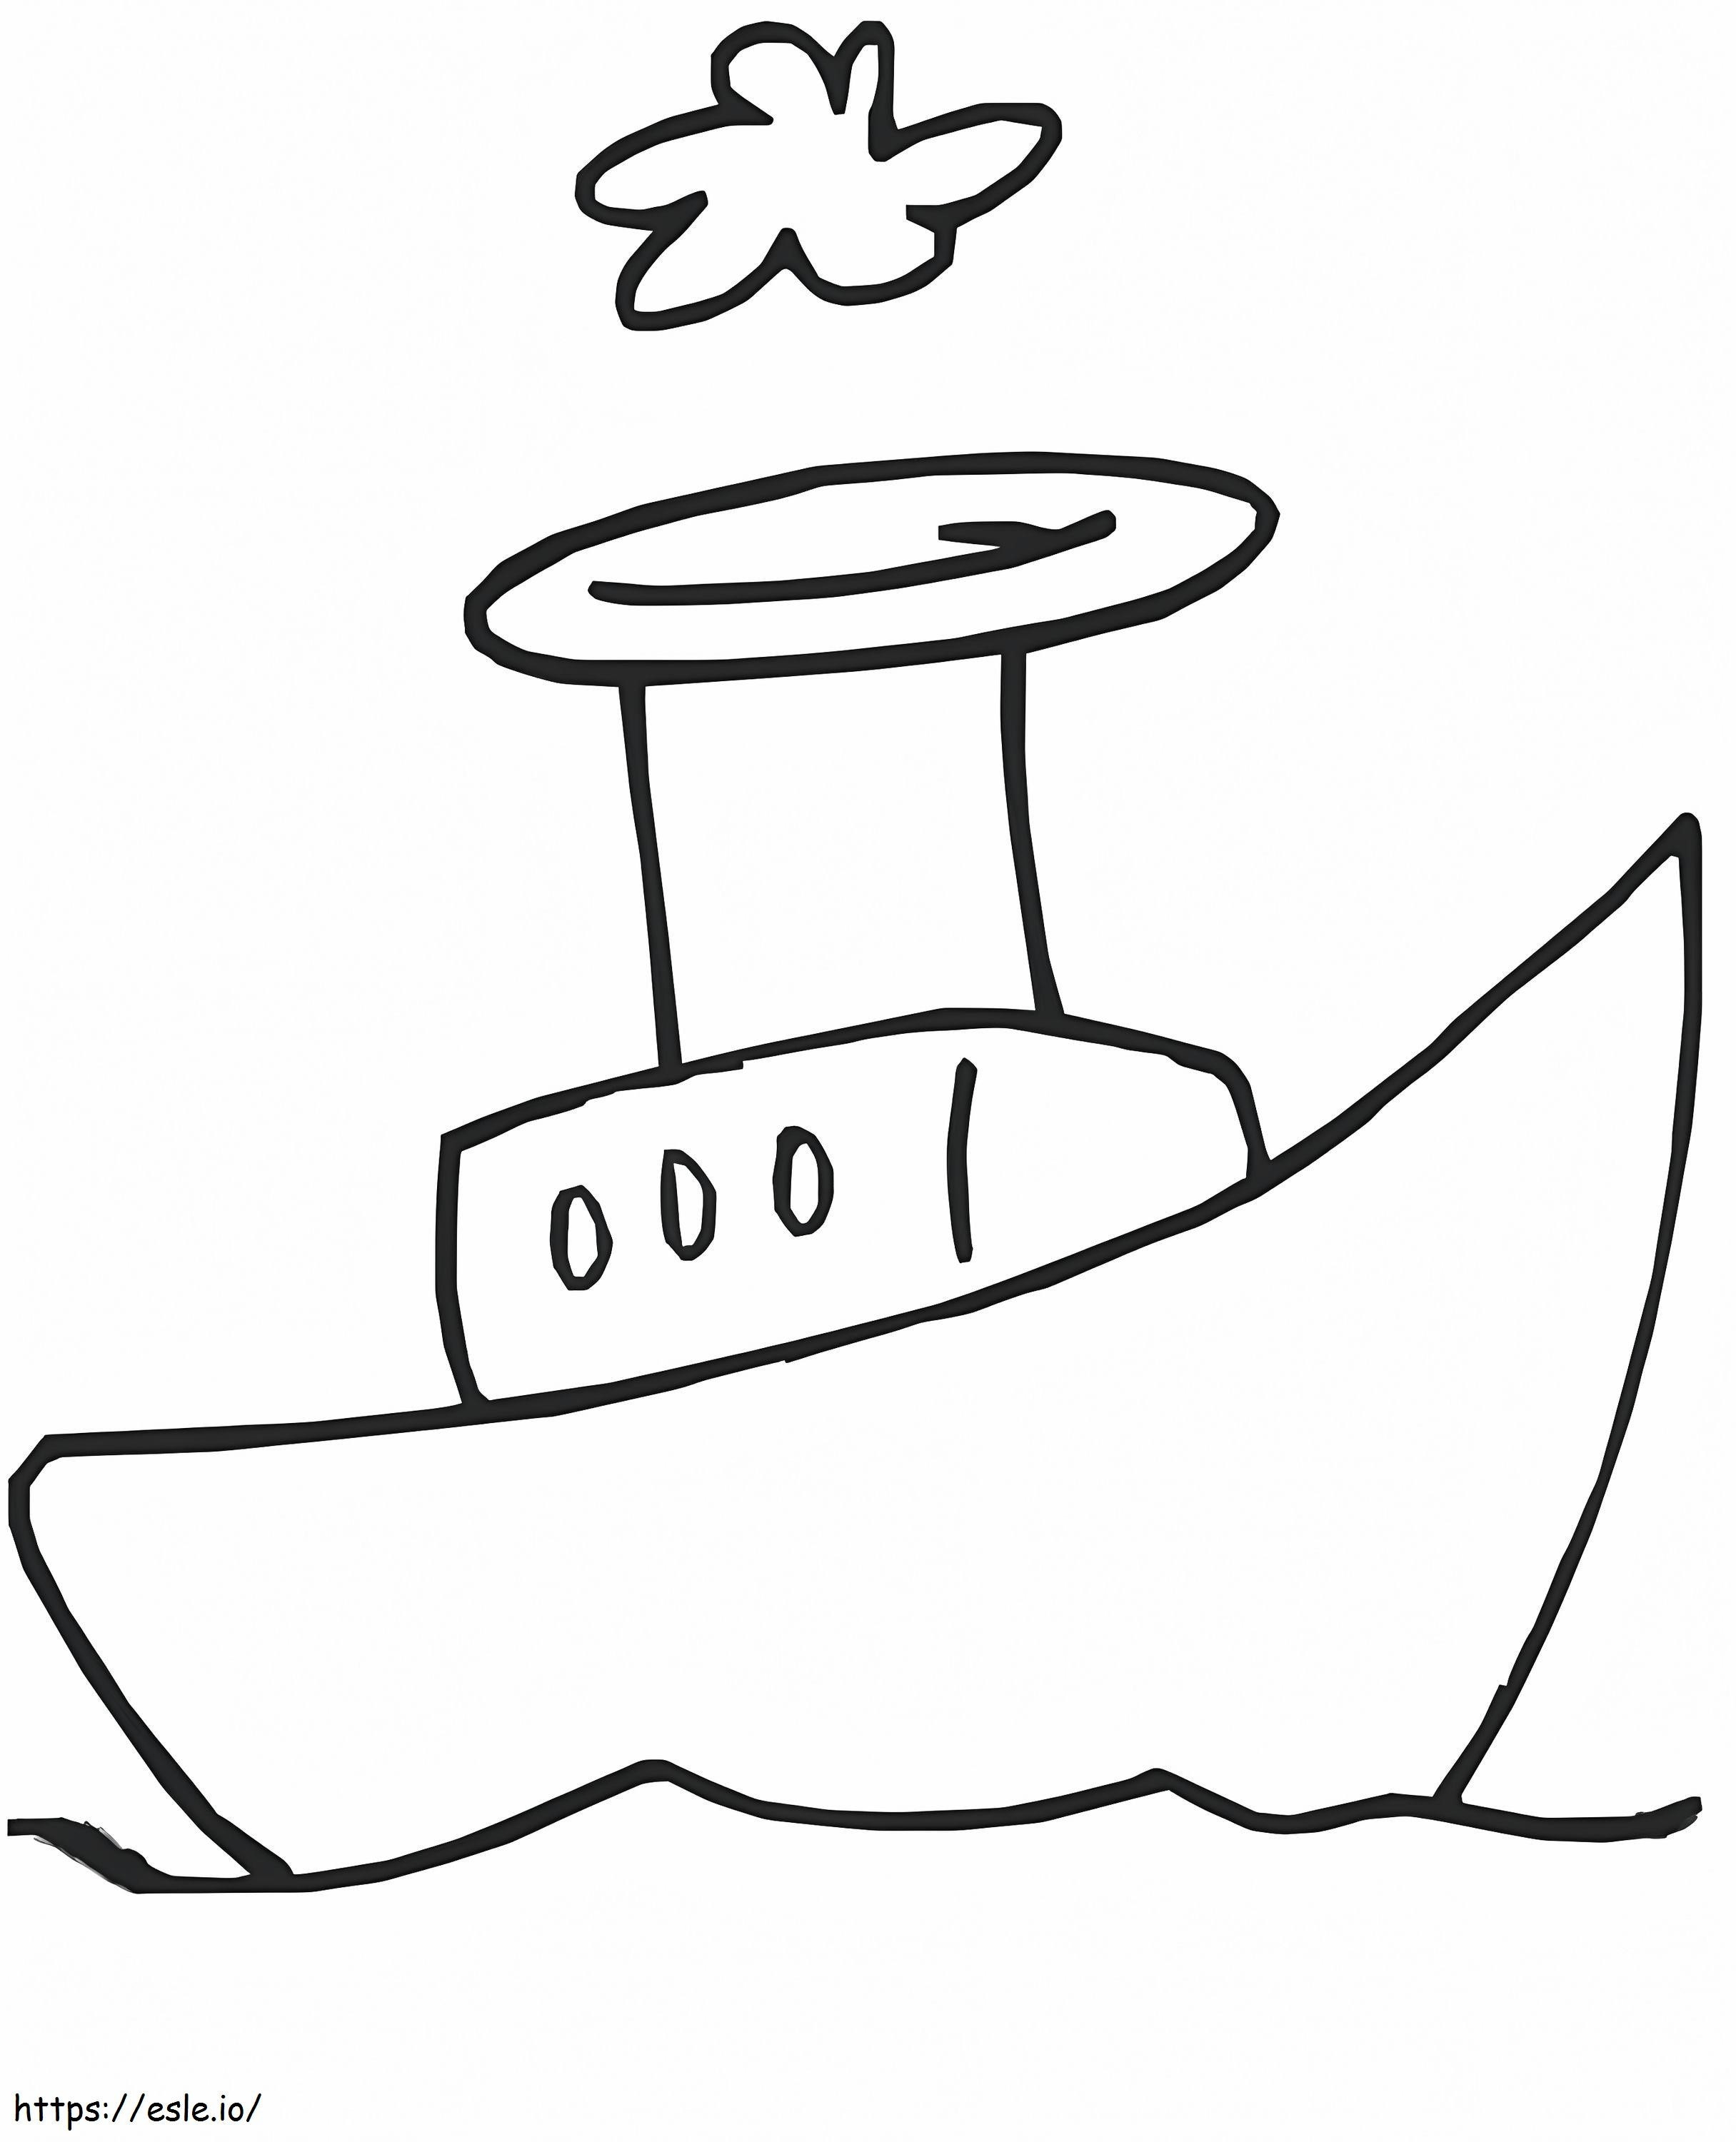 Easy Boat coloring page